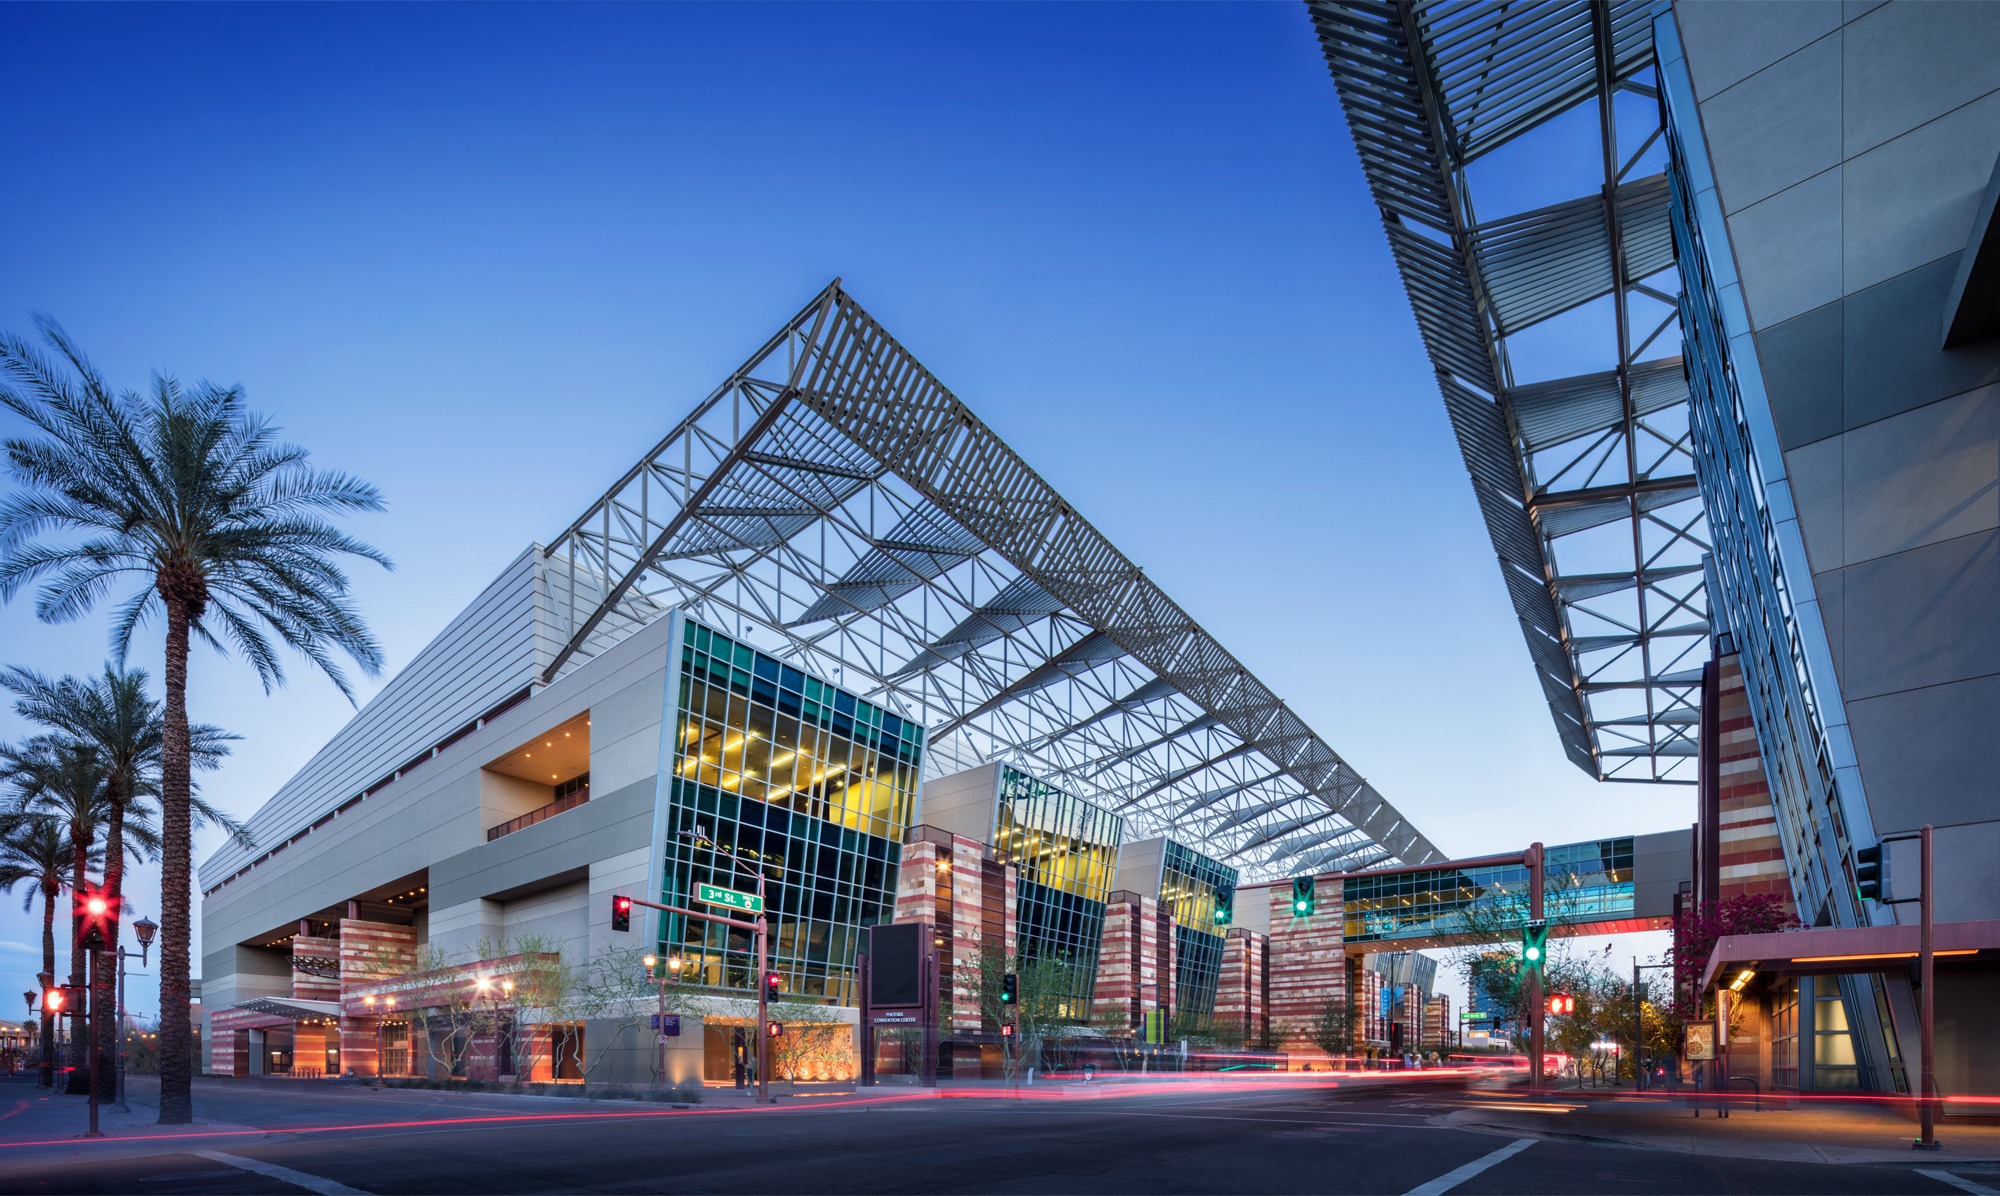 The exterior of the Phoenix Convention Center. There are two main buildings with a glass walkway connecting them. 